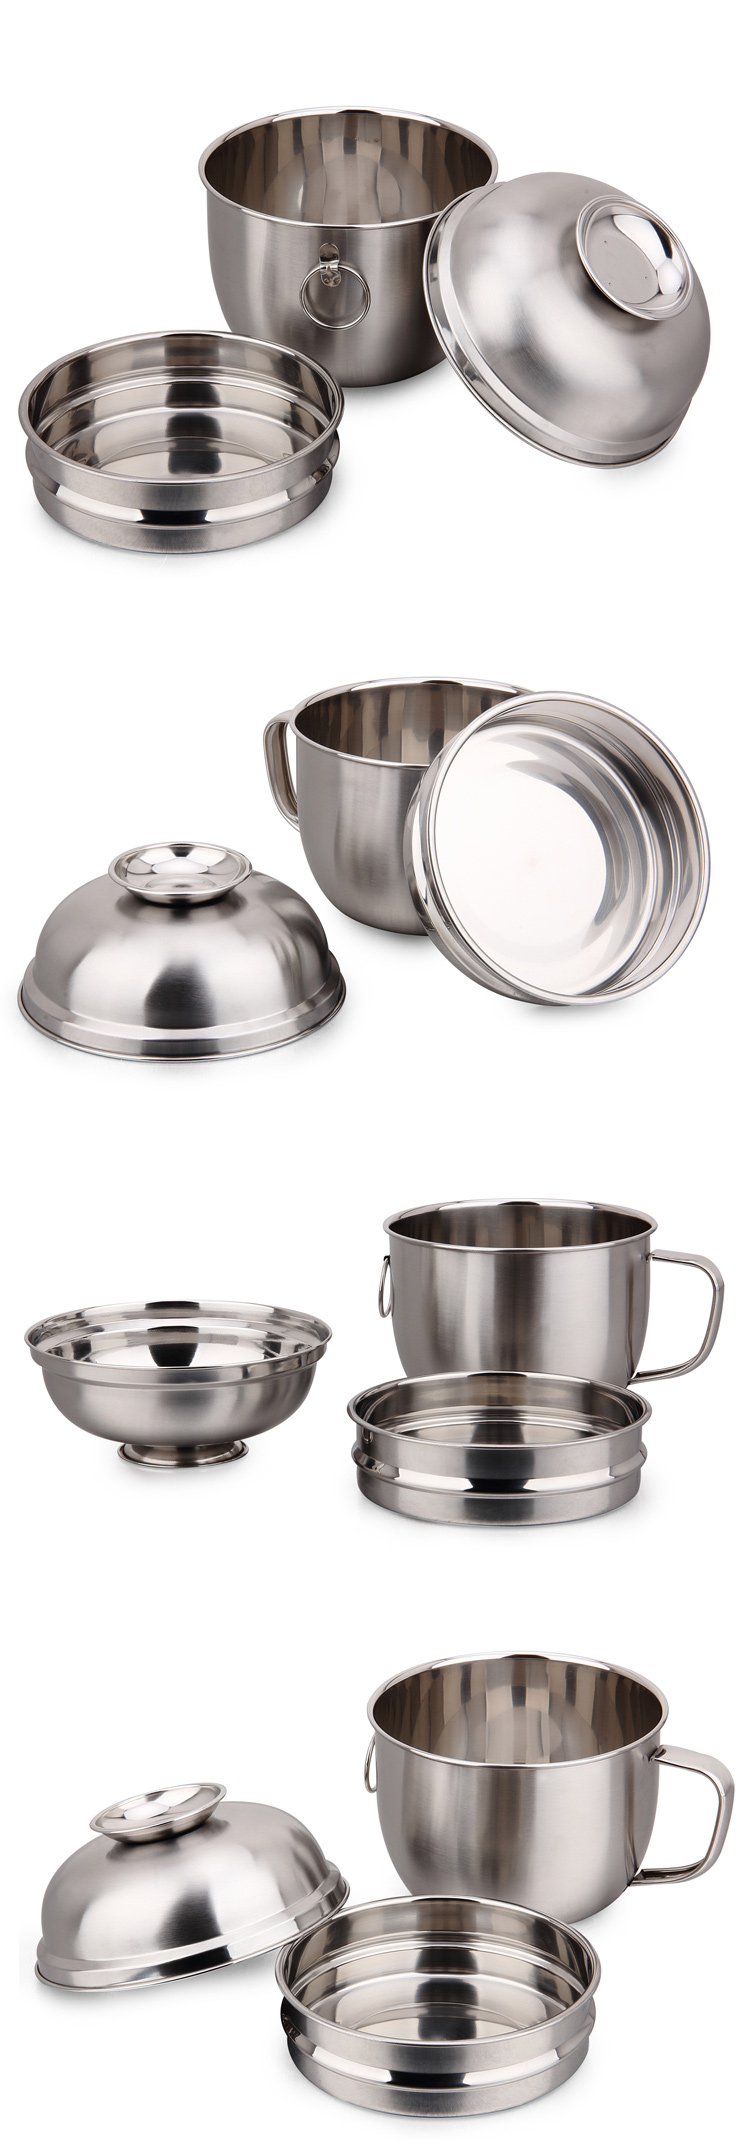 2-Layer Stainless Steel Snack Cup / Takeaway Food Bowl